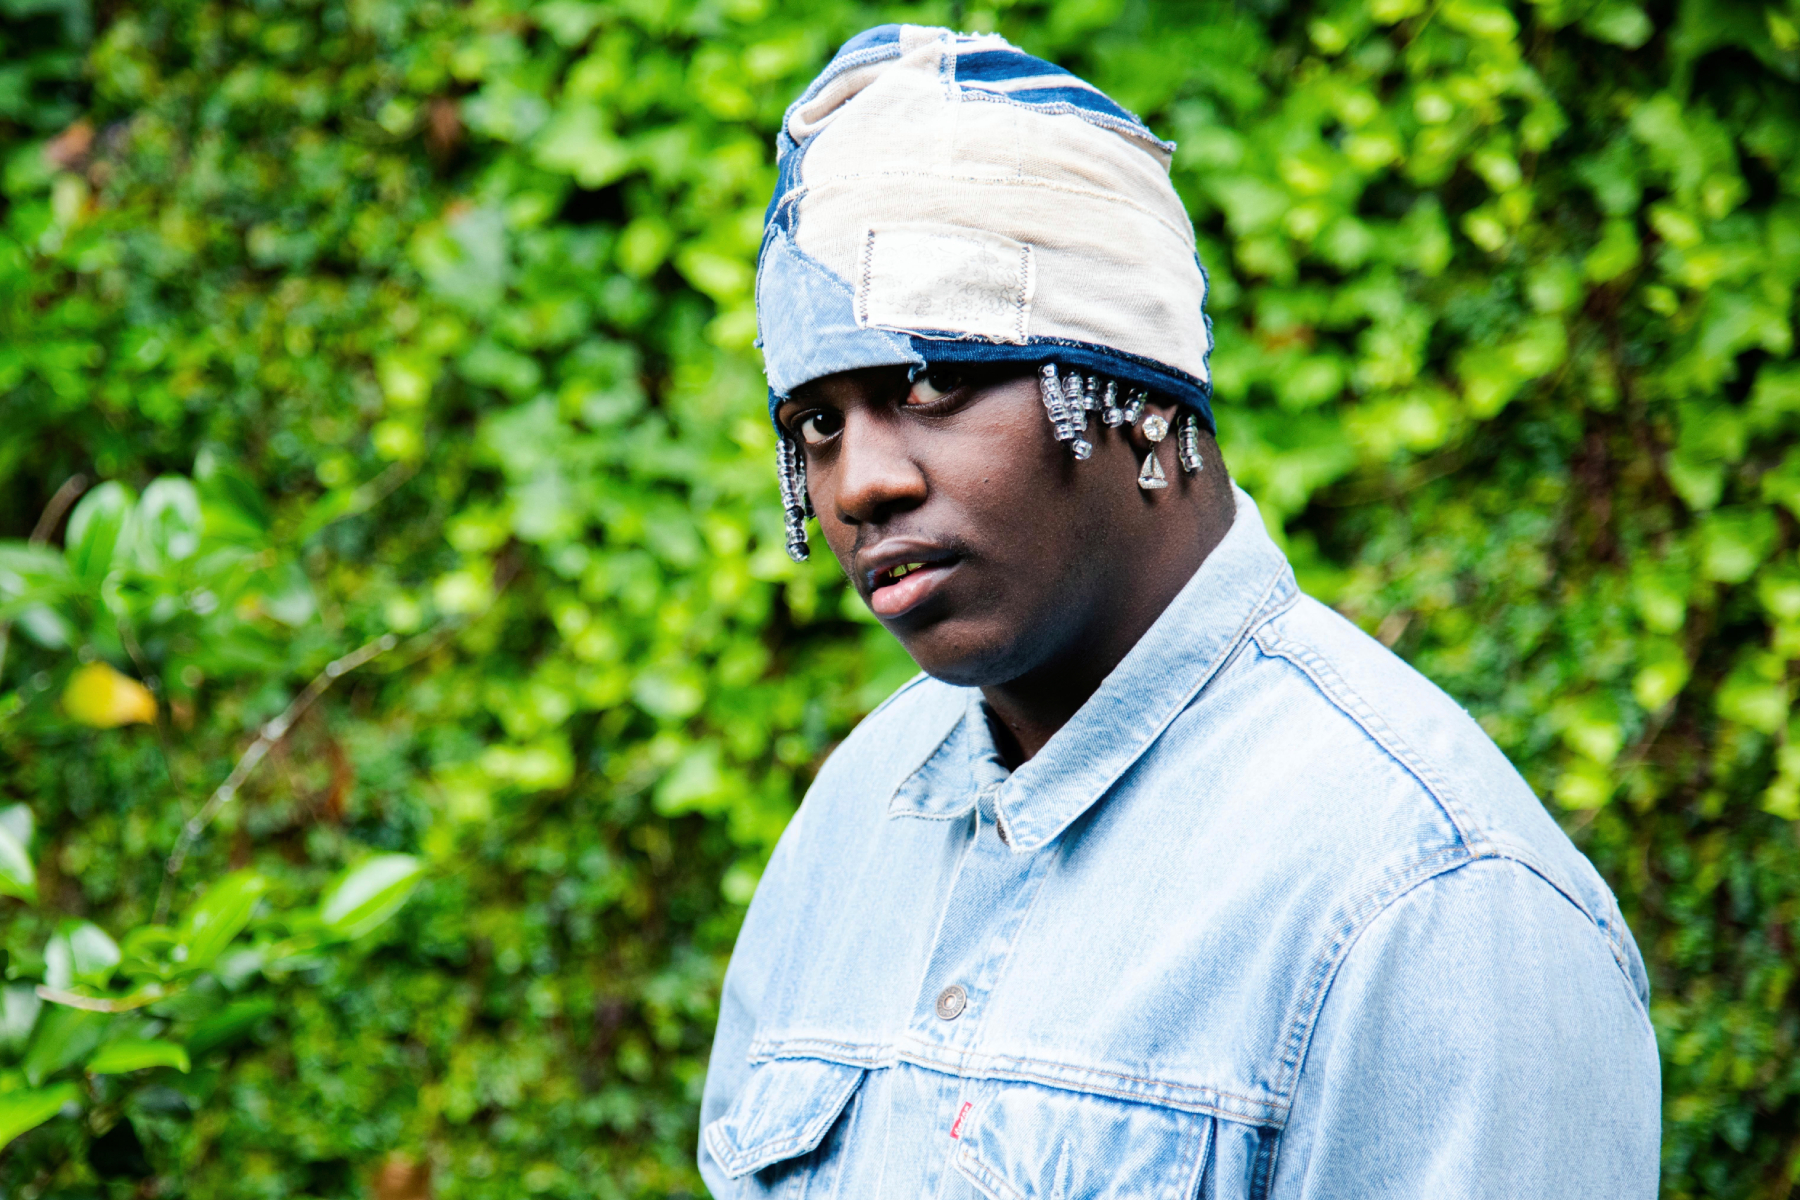 Lil Yachty Sues Opulous For Allegedly Using Images to Raise Millions